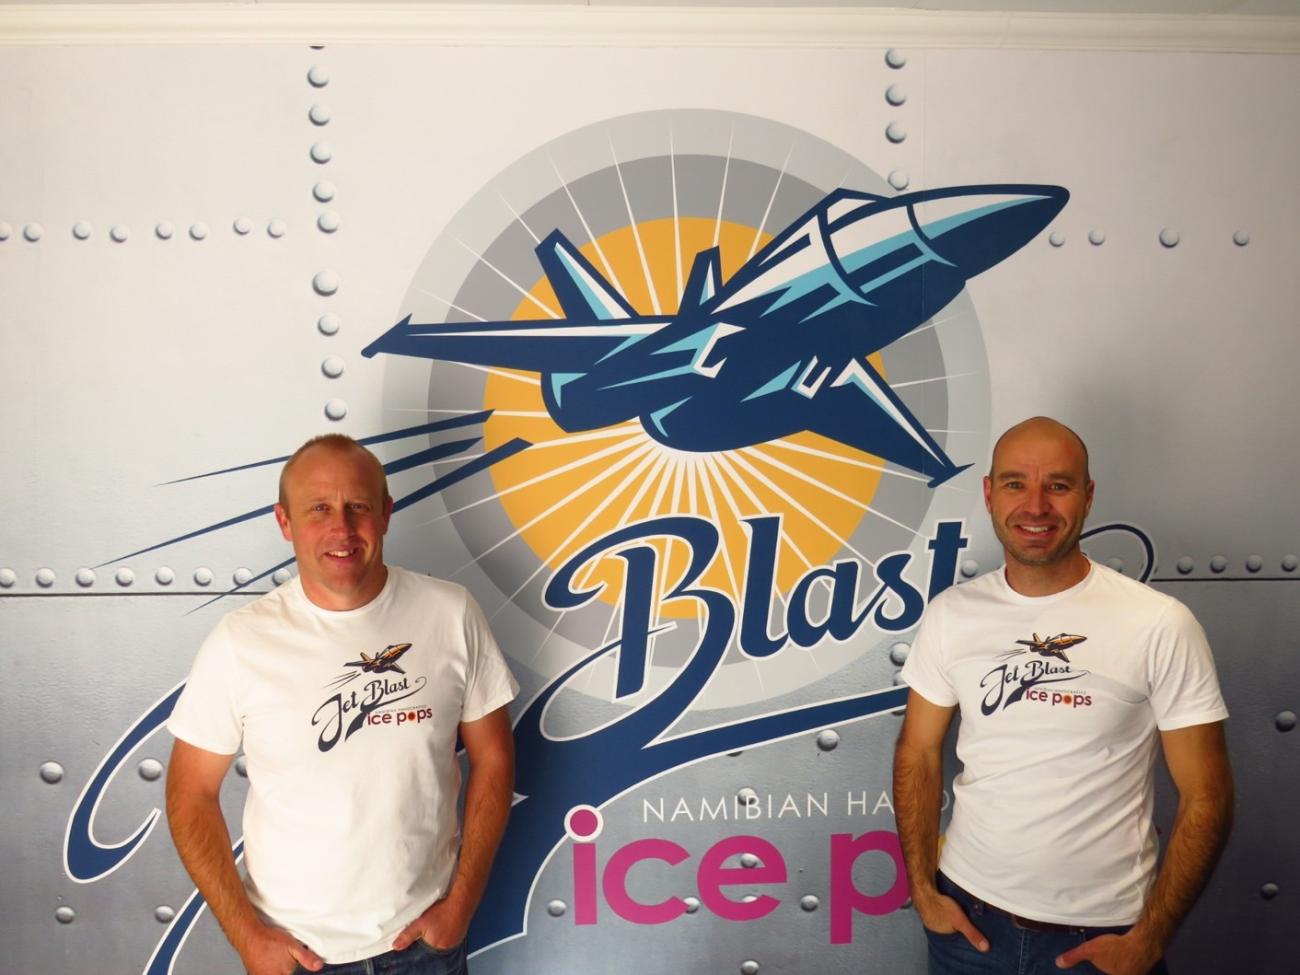 Two men in white shirts standing in front of the Jet Blast Ice Pops logo